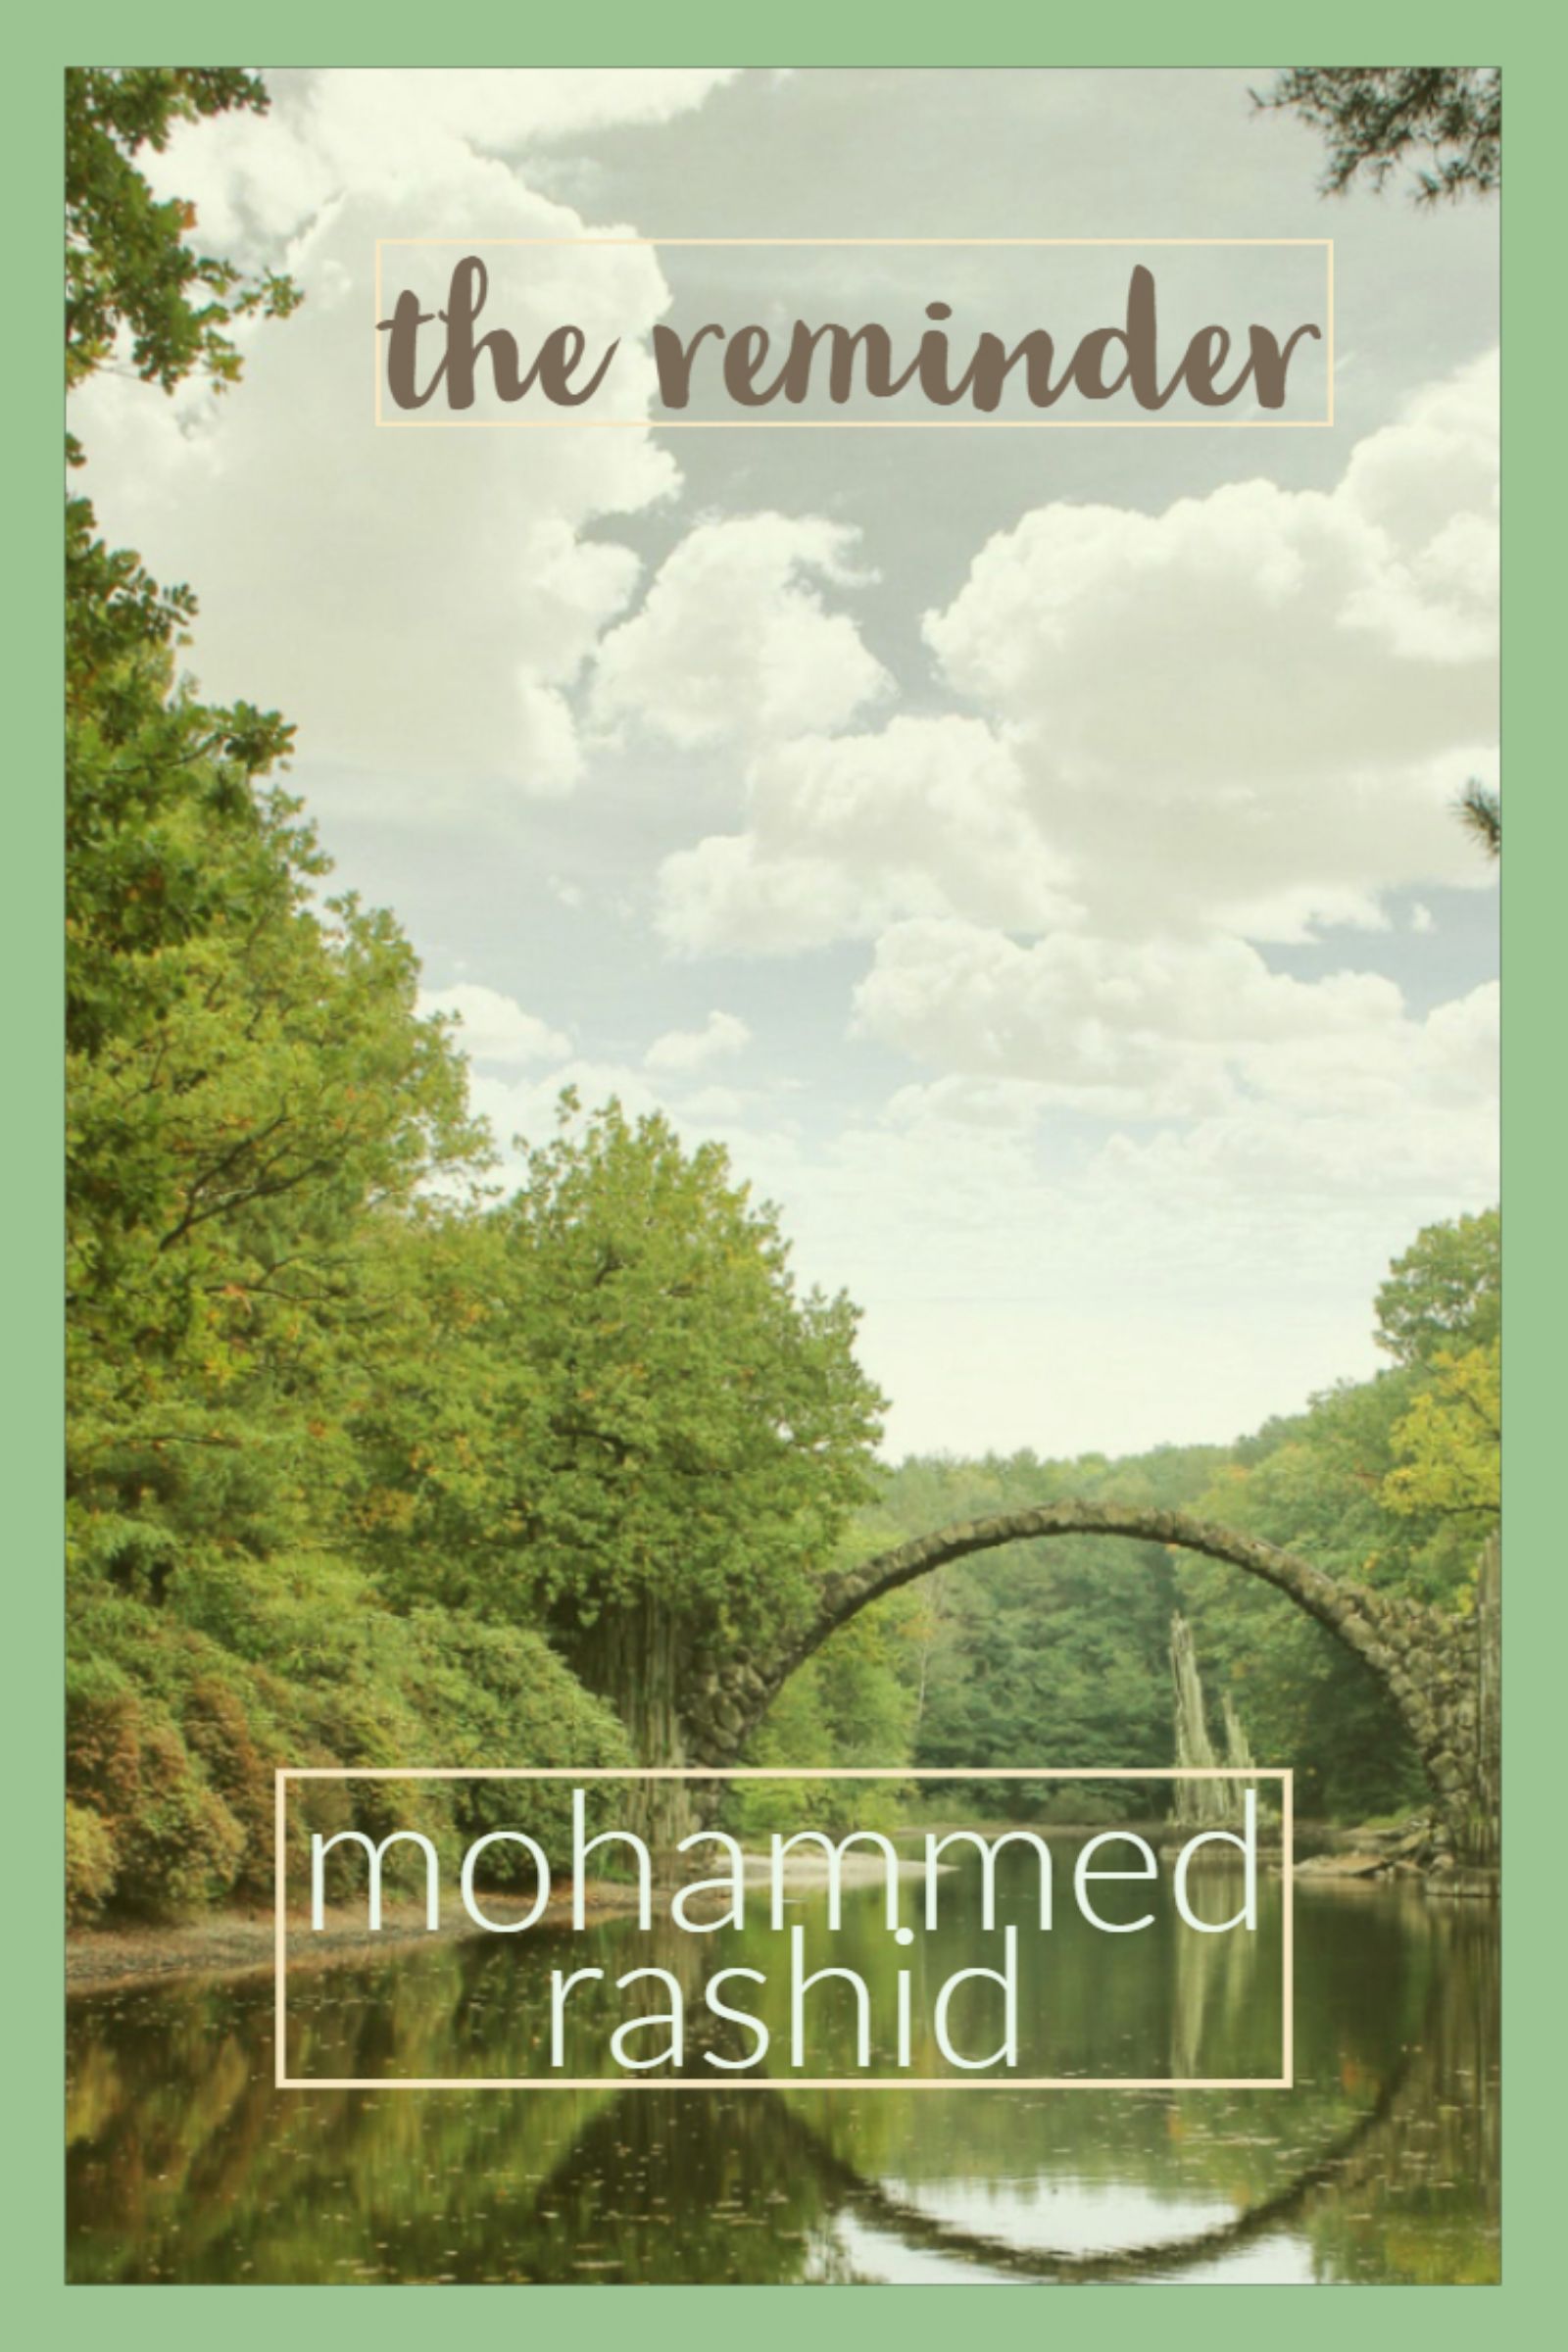 FREE: the reminder by mohammed rashid